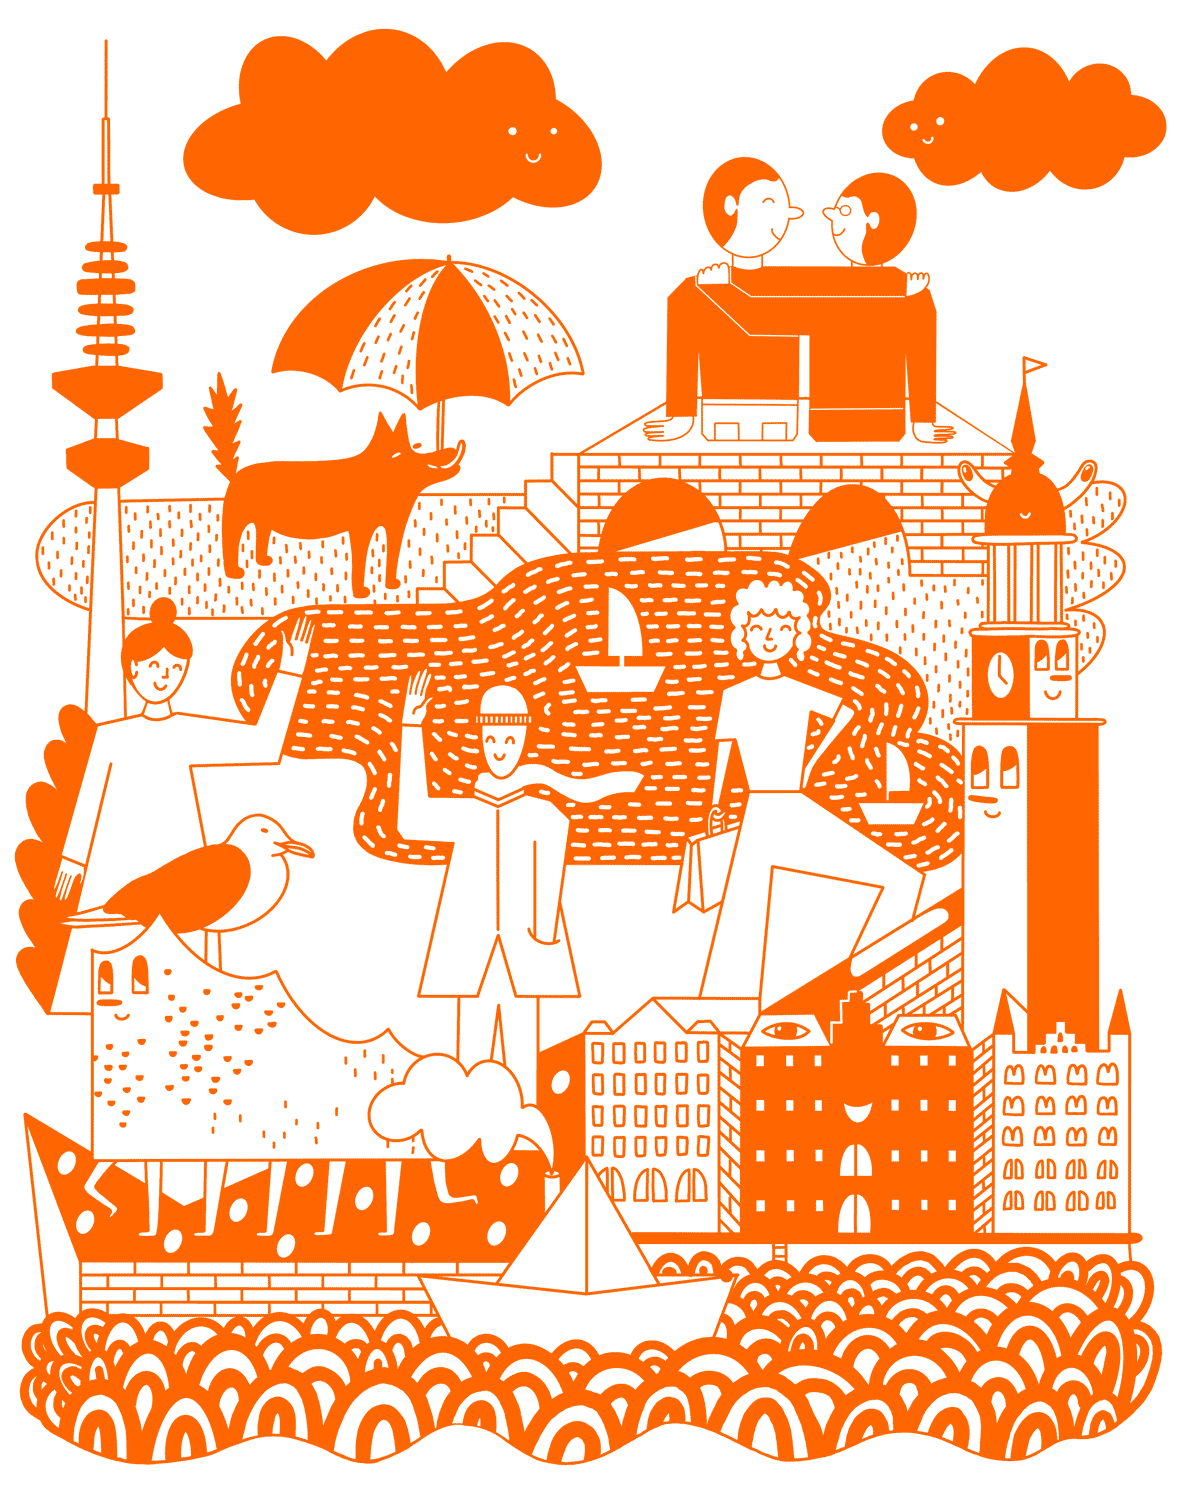 UNIQLO Artwork for t-shirts, a tote bag and an in store mural for the Uniqlo store in Hamburg.